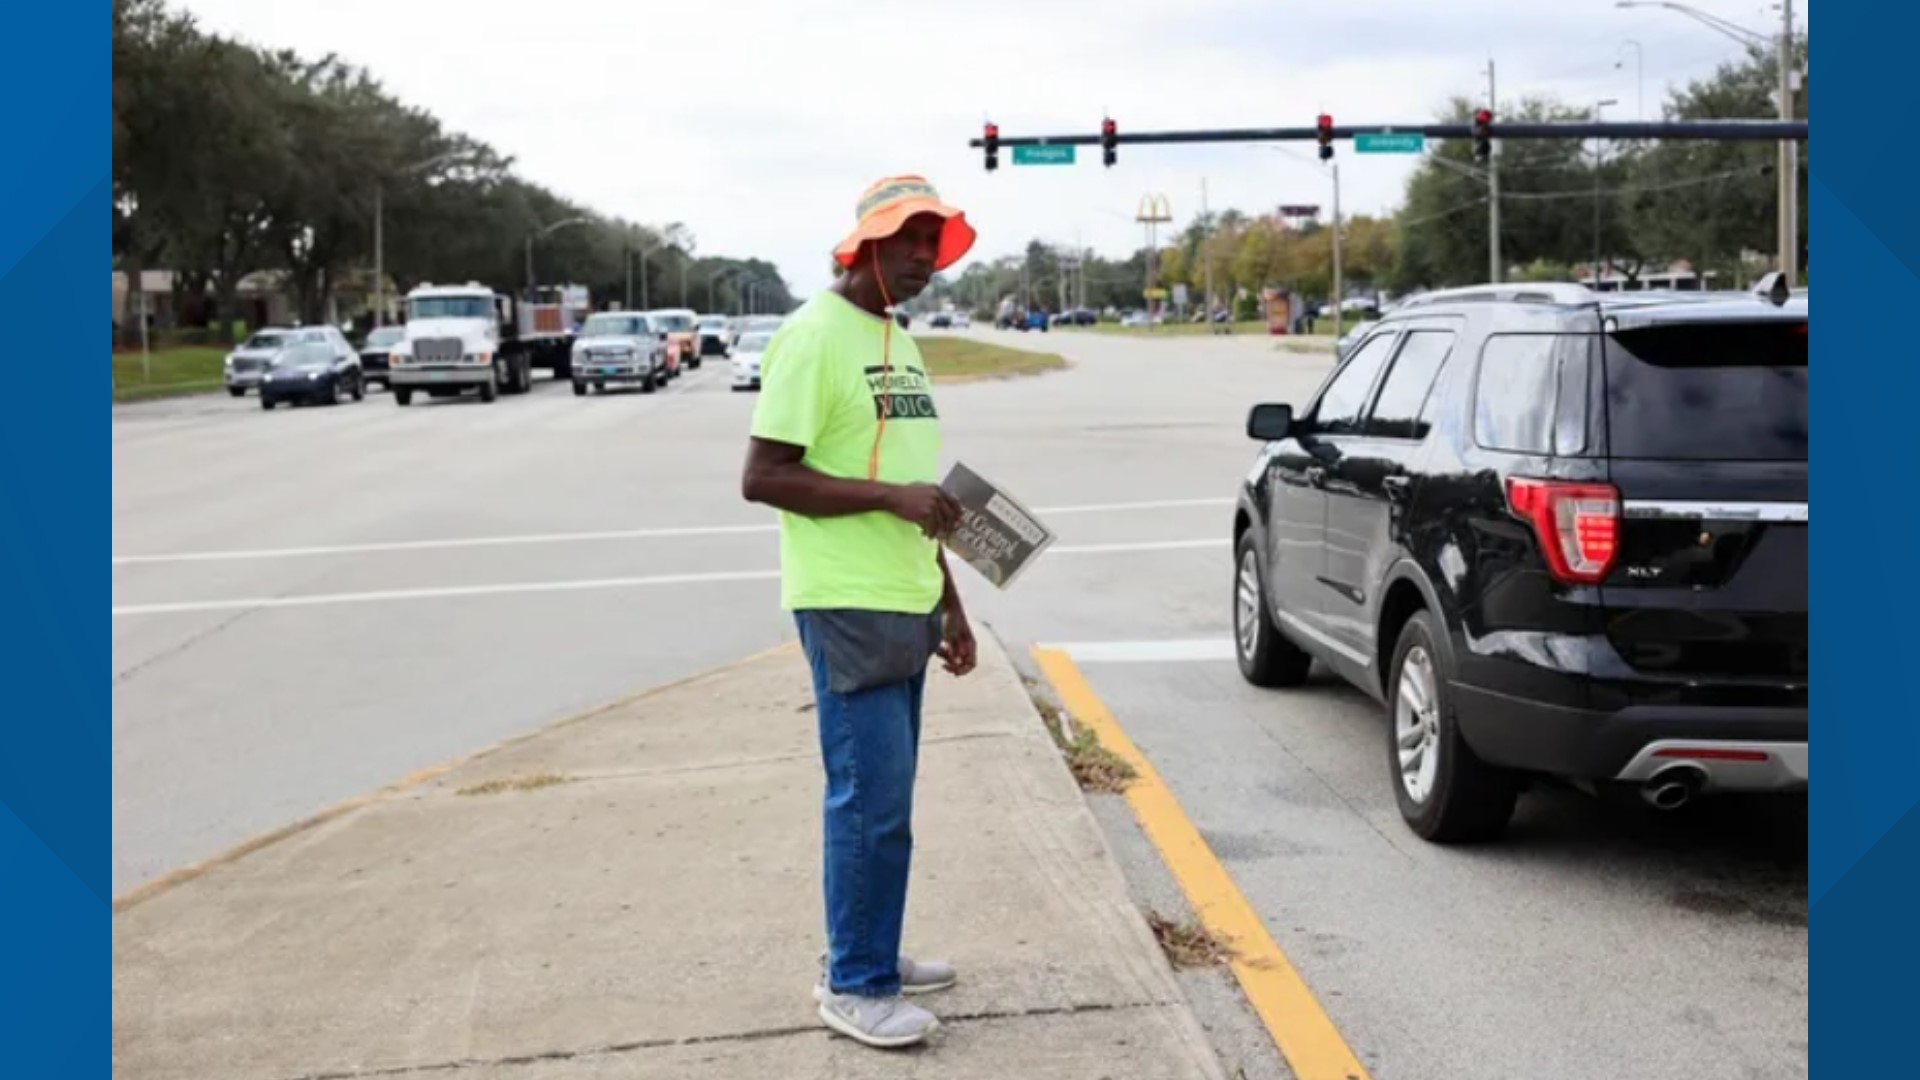 The City Council changed Jacksonville’s traffic code in February 2023 to forbid “any physical interaction between a pedestrian and an occupant of a motor vehicle.”